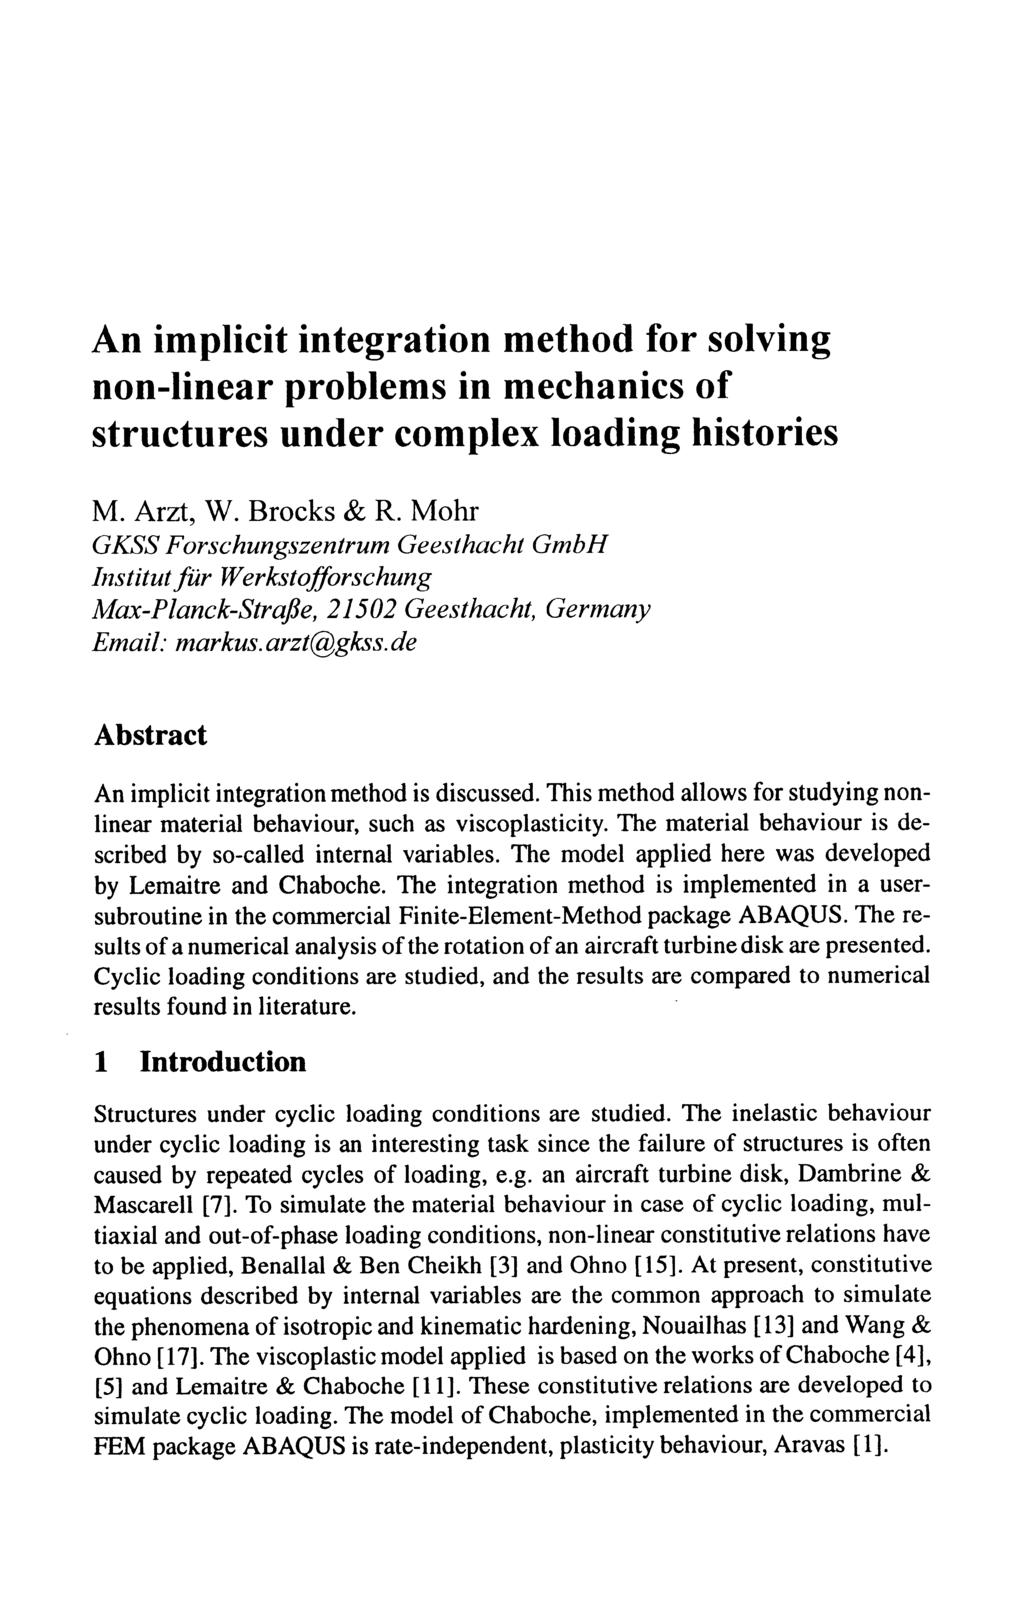 An implicit integration method for solving non-linear problems in mechanics of structures under complex loading histories M. Arzt, W. Brocks & R.